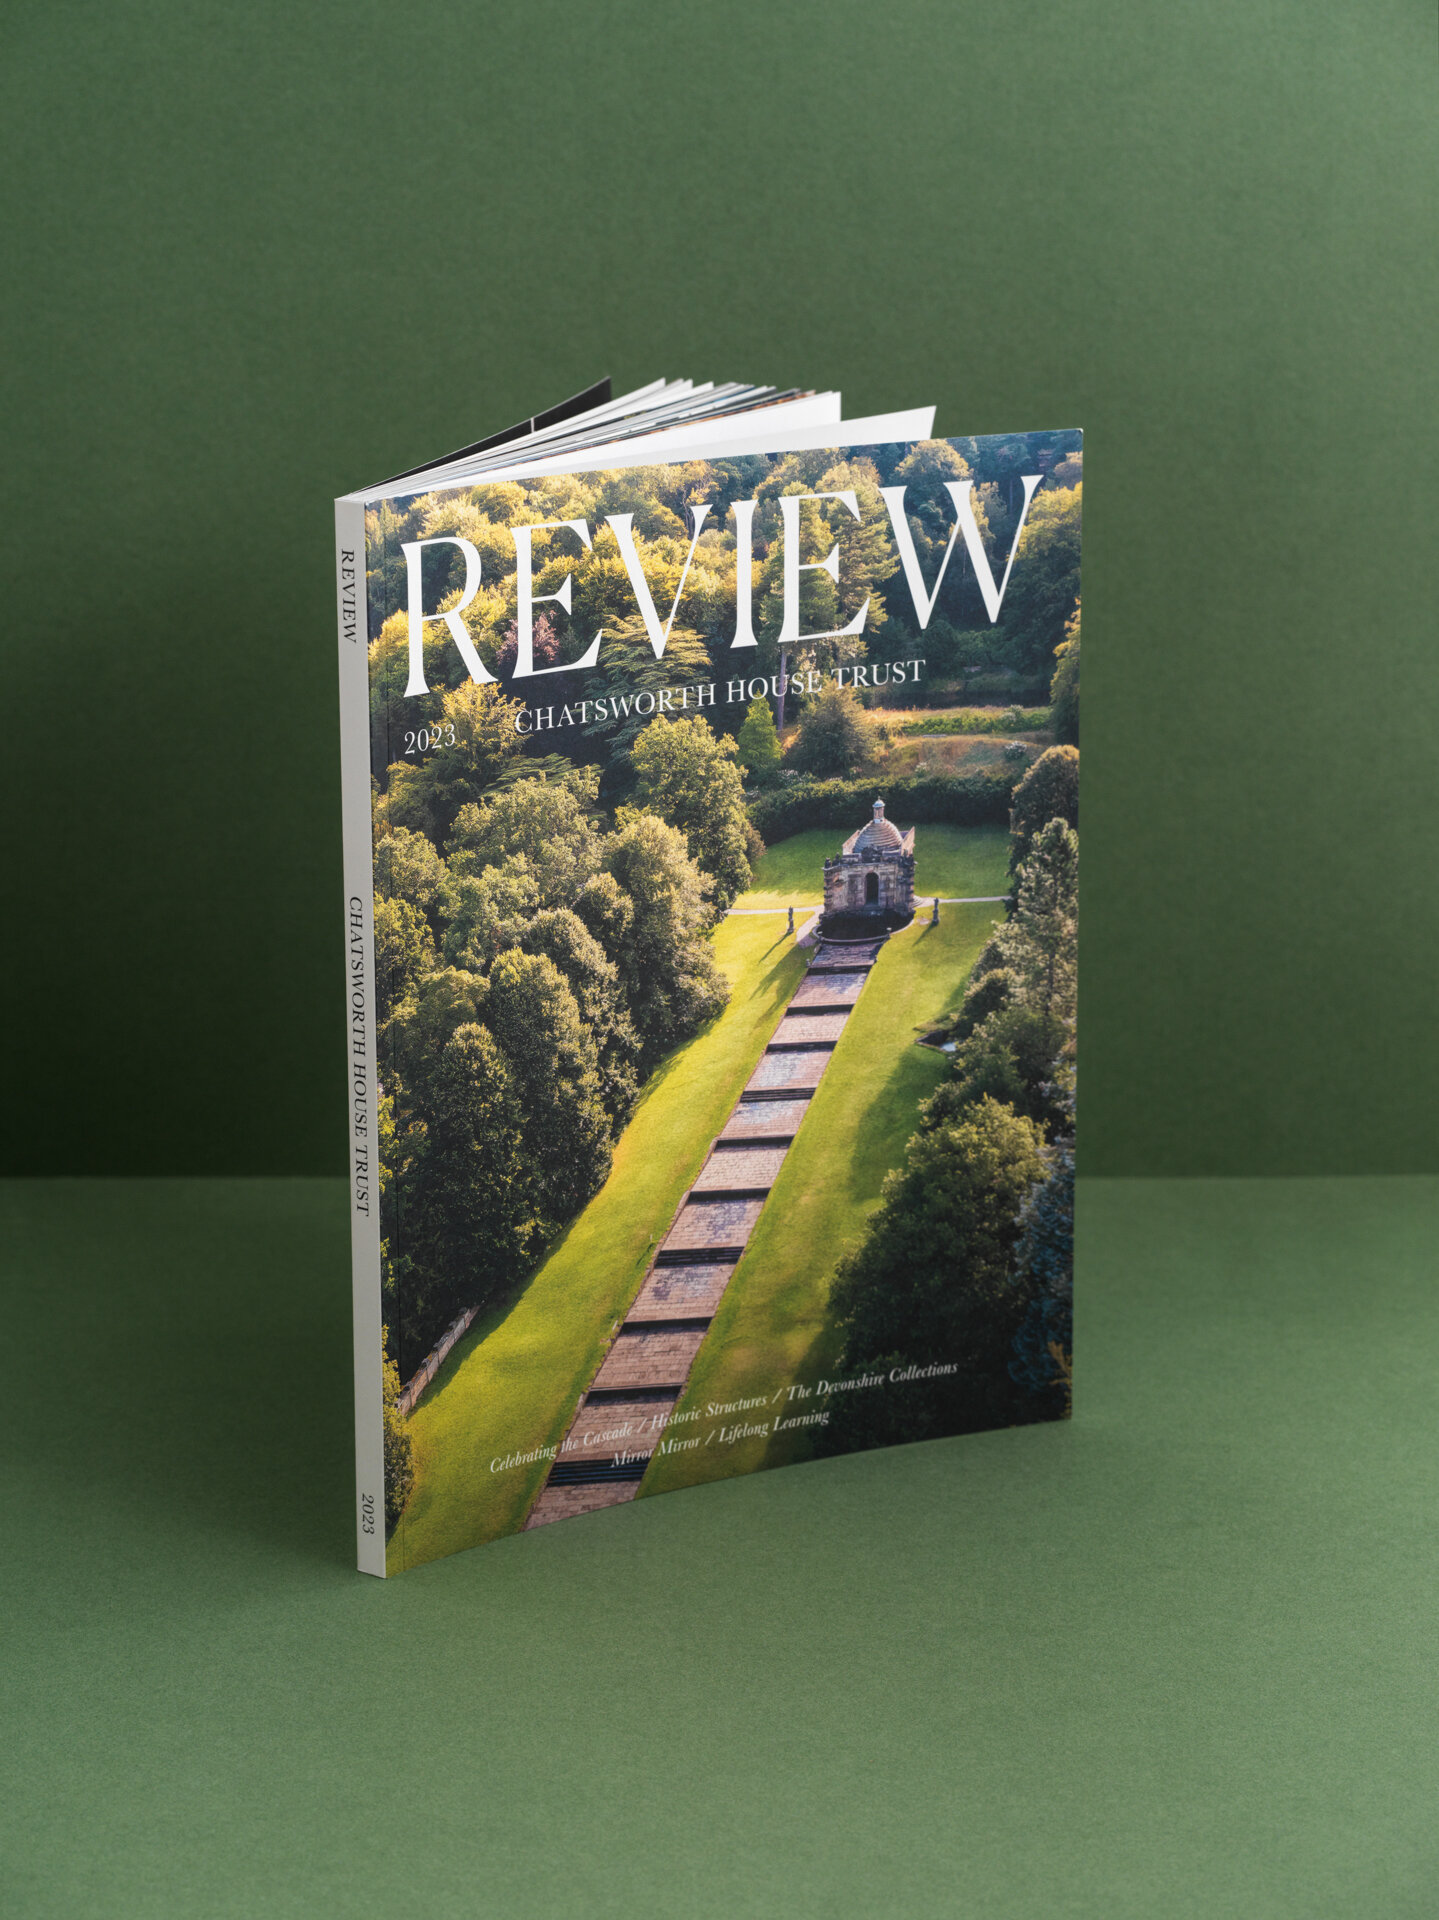 Chatsworth House Trust - A creative approach to designing and printing an annual review